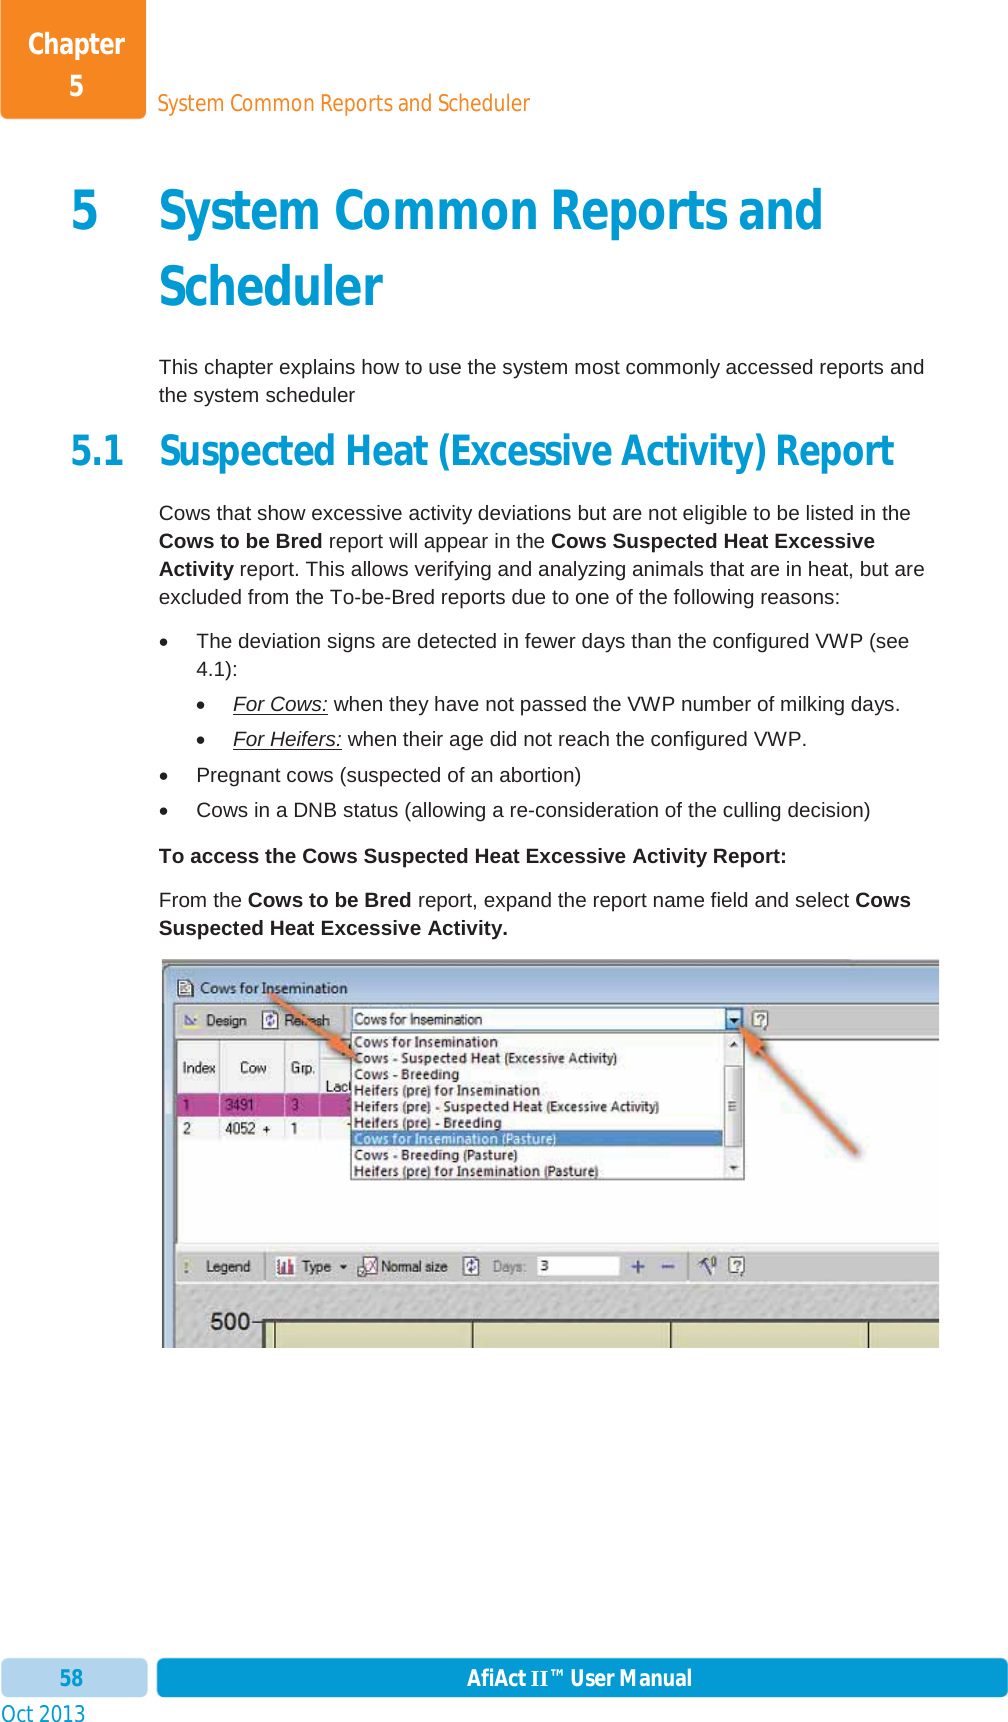 Oct 2013 AfiAct II™ User Manual58System Common Reports and SchedulerChapter 55 System Common Reports and SchedulerThis chapter explains how to use the system most commonly accessed reports and the system scheduler 5.1 Suspected Heat (Excessive Activity) Report Cows that show excessive activity deviations but are not eligible to be listed in the Cows to be Bred report will appear in the Cows Suspected Heat Excessive Activity report. This allows verifying and analyzing animals that are in heat, but are excluded from the To-be-Bred reports due to one of the following reasons: x  The deviation signs are detected in fewer days than the configured VWP (see 4.1): xFor Cows: when they have not passed the VWP number of milking days. xFor Heifers: when their age did not reach the configured VWP. x  Pregnant cows (suspected of an abortion) x  Cows in a DNB status (allowing a re-consideration of the culling decision) To access the Cows Suspected Heat Excessive Activity Report: From the Cows to be Bred report, expand the report name field and select Cows Suspected Heat Excessive Activity.